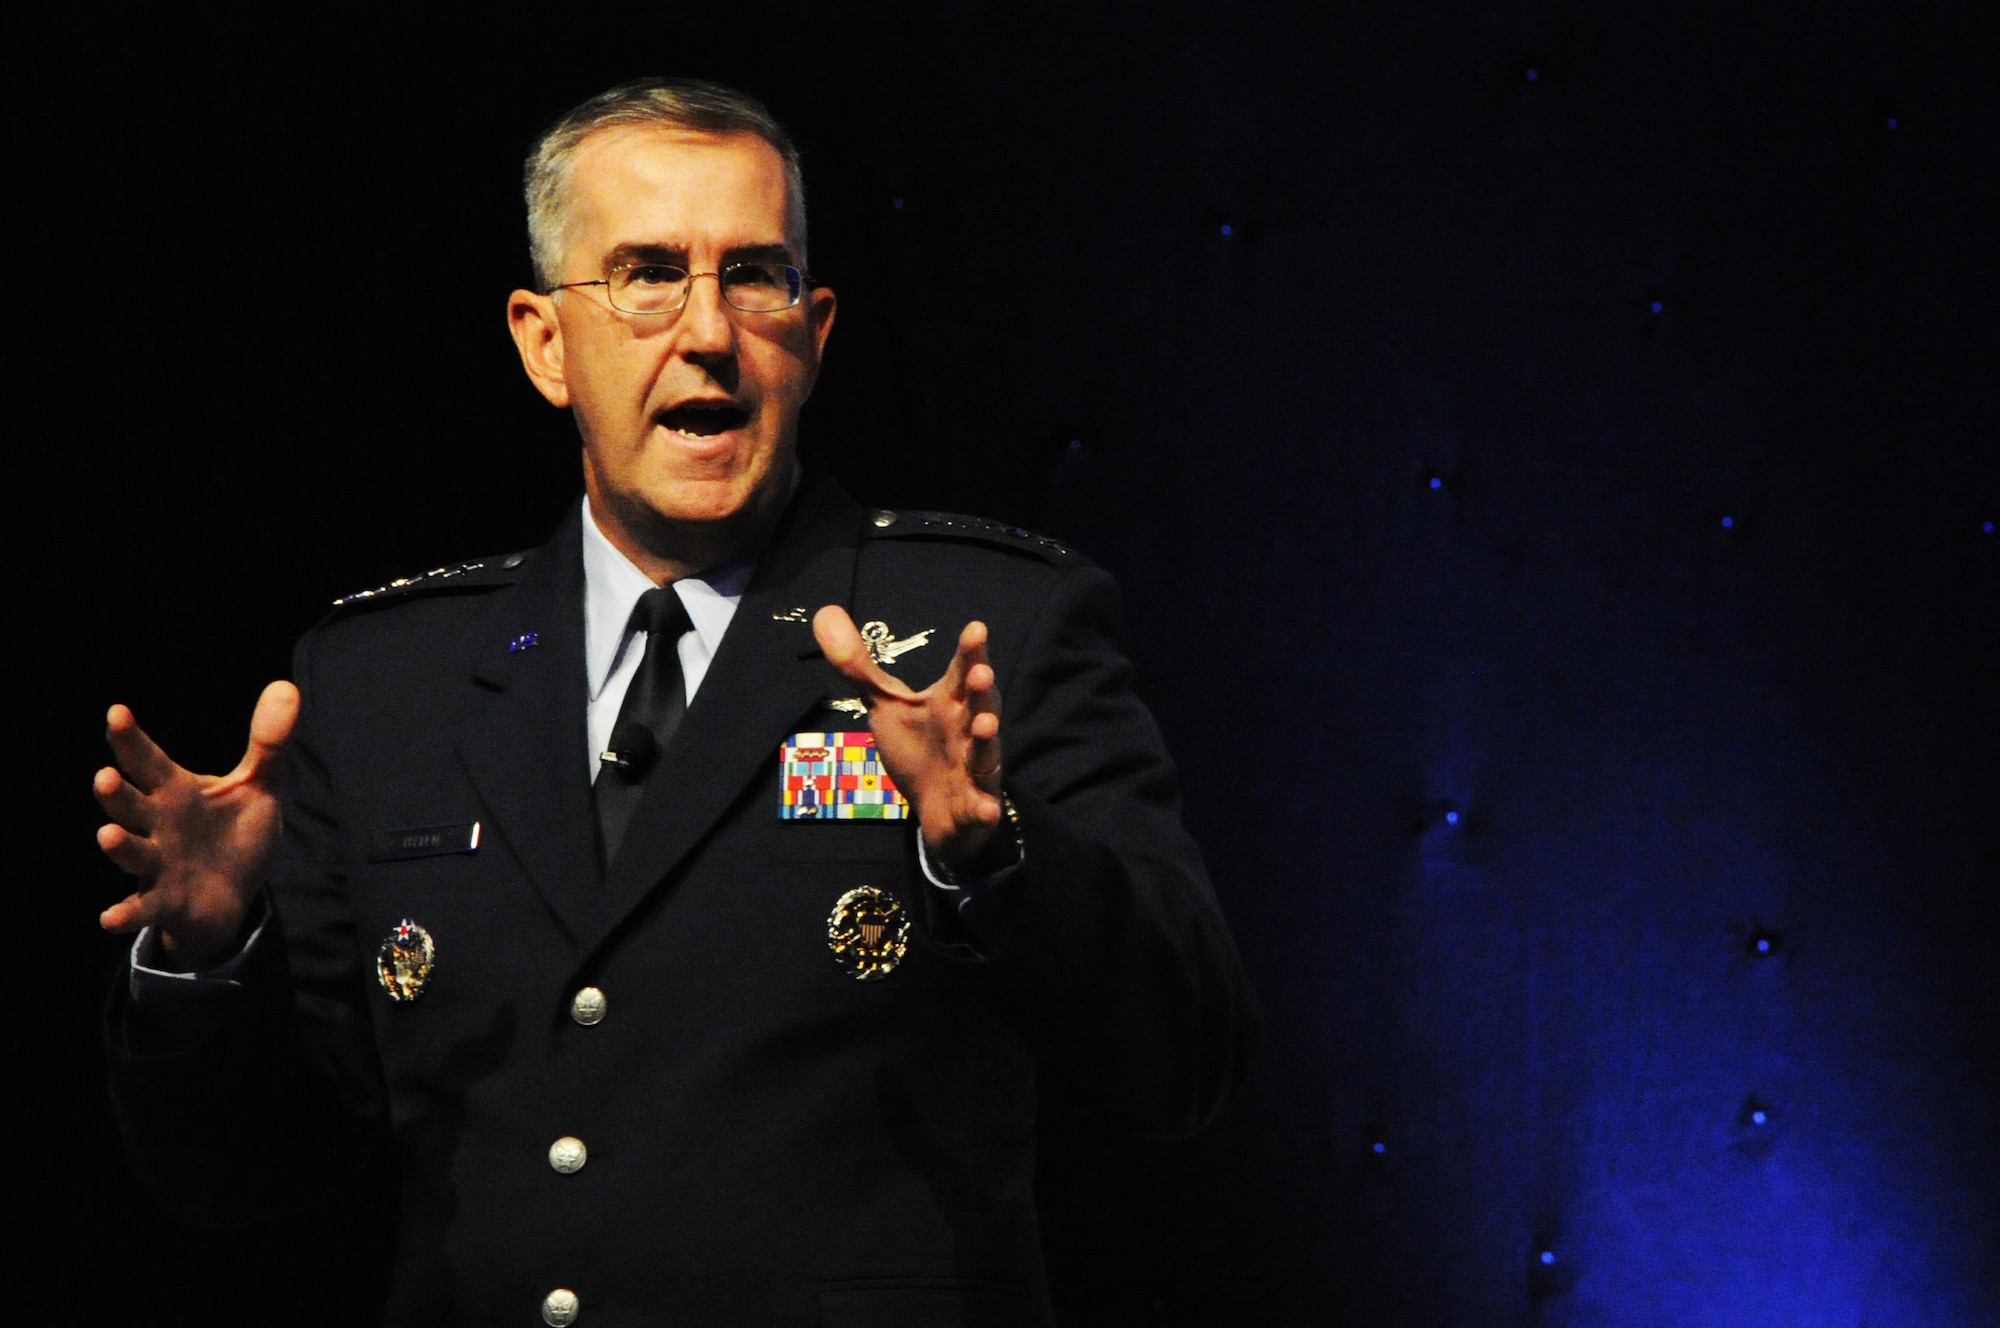 Gen. John Hyten, the Air Force Space Command commander, speaks to the audience on maintaining space and cyber capabilities during the 2014 Air Force Association Air and Space Conference Technology and Exposition, Sept. 16, 2014, in Washington, D.C. Hyten is responsible for organizing, equipping, training and maintaining mission-ready space and cyberspace forces and capabilities for North American Aerospace Defense Command, U.S. Strategic Command and other combatant commands around the world. (U.S. Air Force photo/Staff Sgt. Matt Davis)